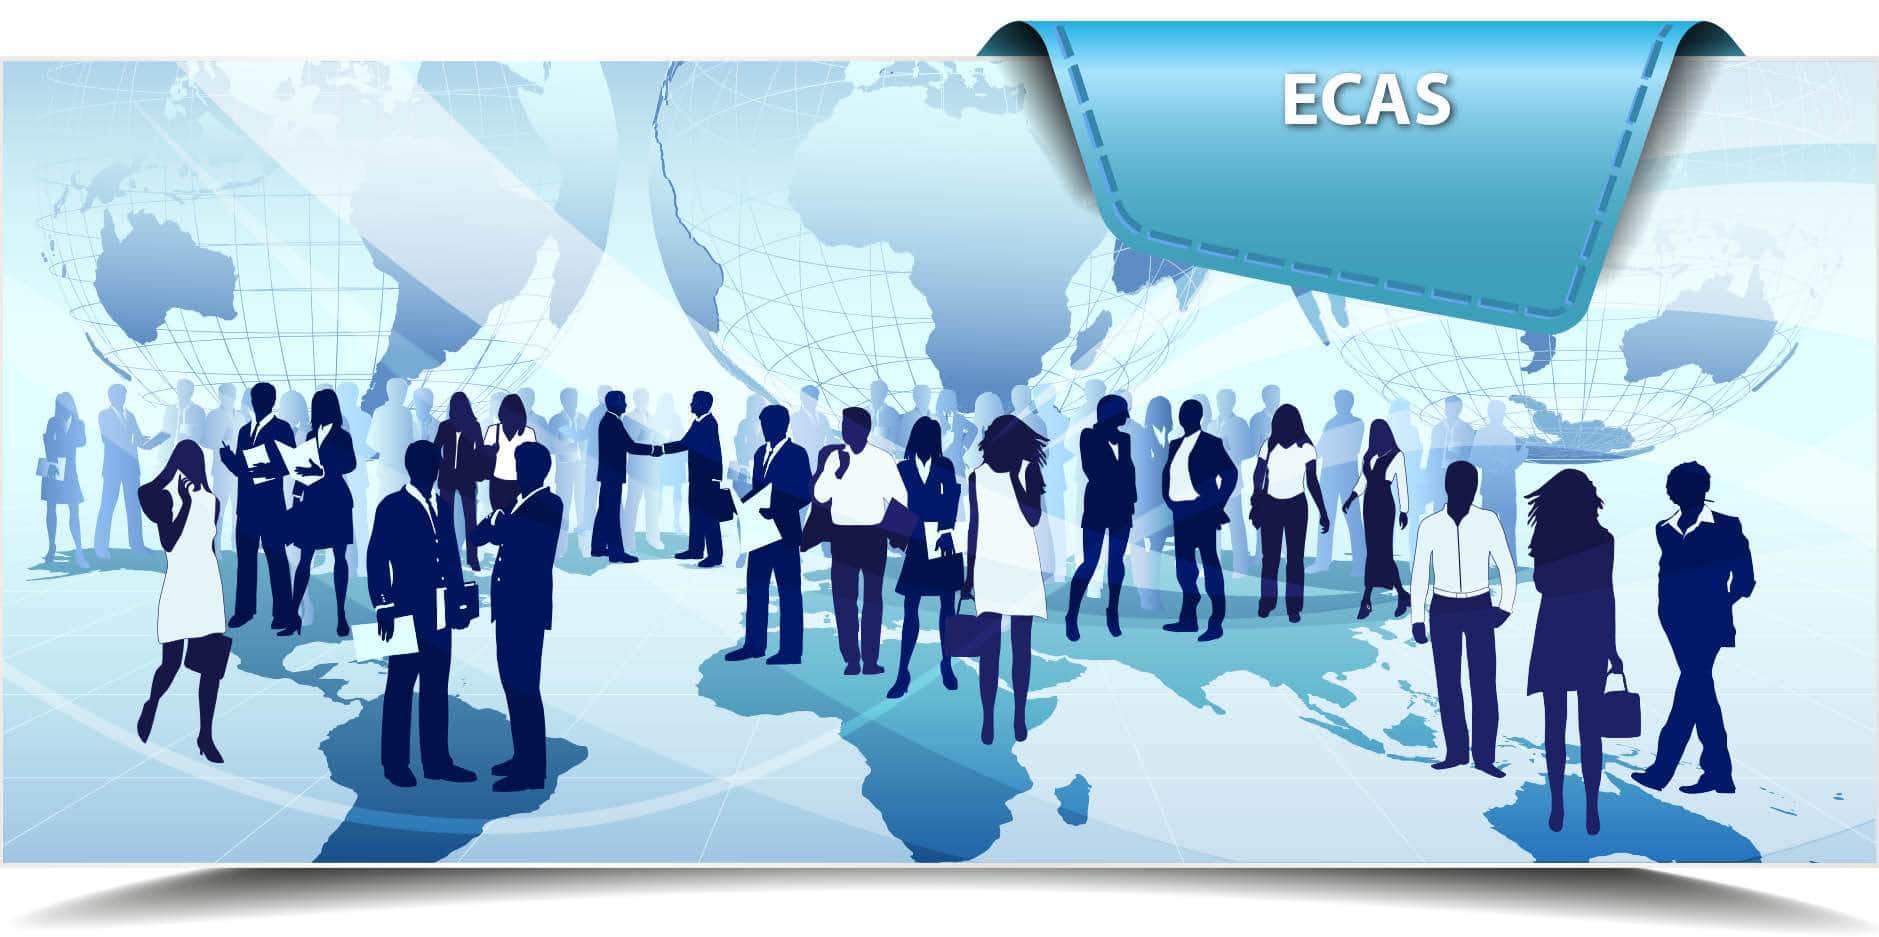 ECAS News Flash: ECAS’s Call for a Citizen Centric EU | CSO Recommendations for an Effective #ConferenceofEurope | New European Citizens’ Initiative Forum